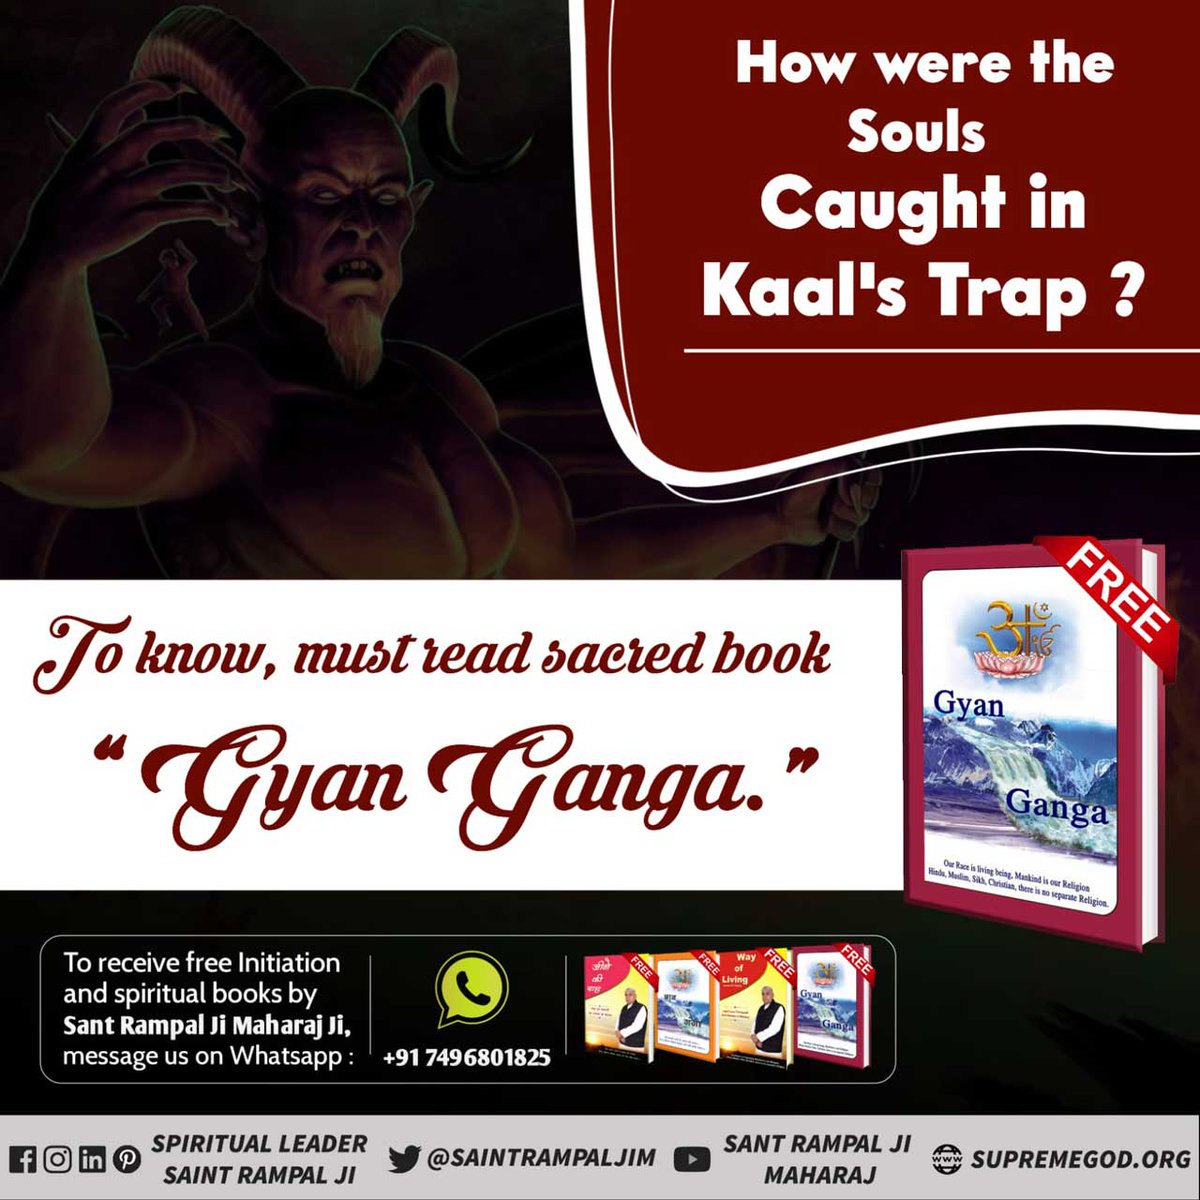 #GodMorningWednesday How were the Souls Caught in Kaal's Trap? To know more, must read the previous book 'Gyan Ganga'' #WednesdayMotivation